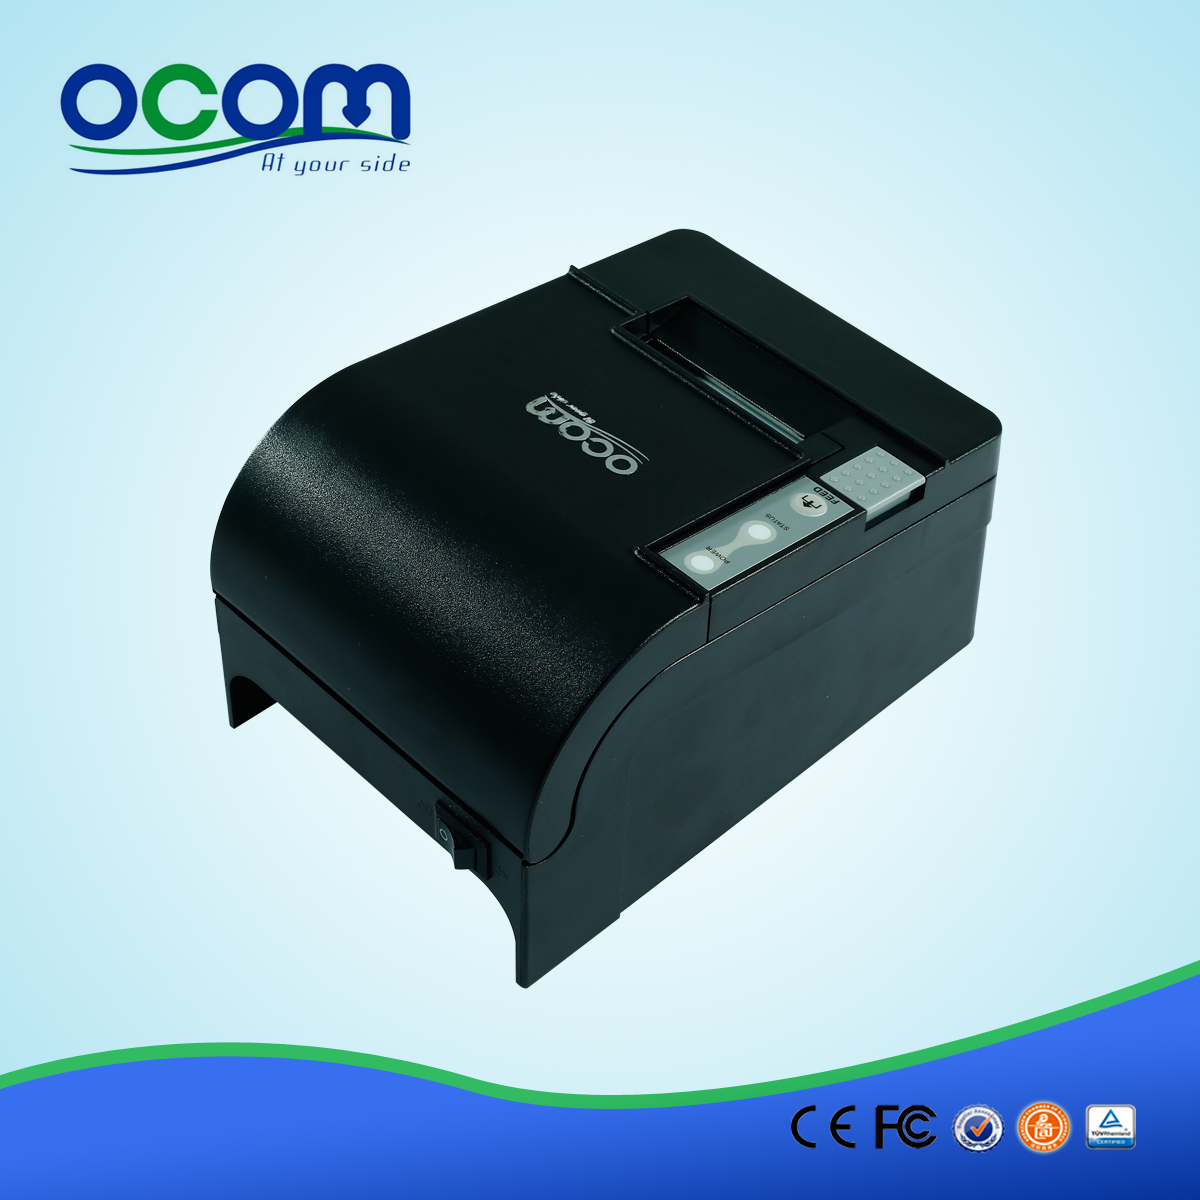 OCPP-58C Small Direct Thermal Printer Price With Optional Interface